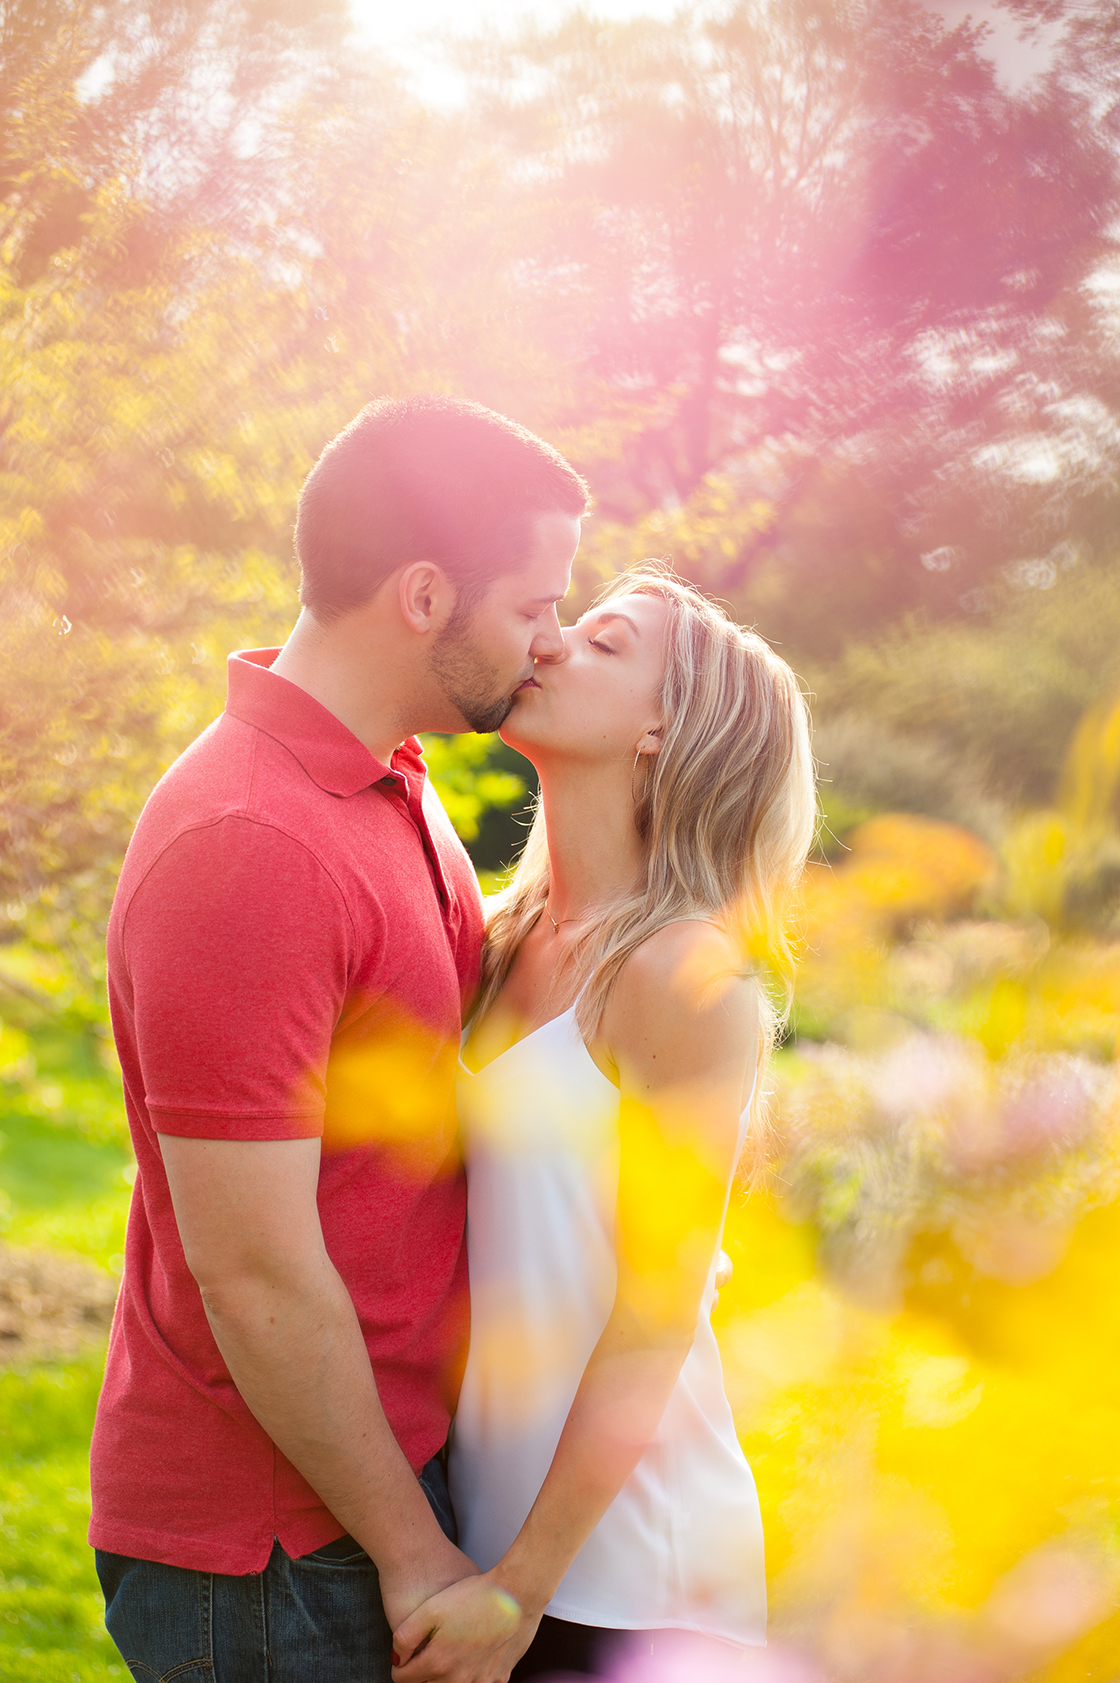 A couple kissing in glowing spring light.